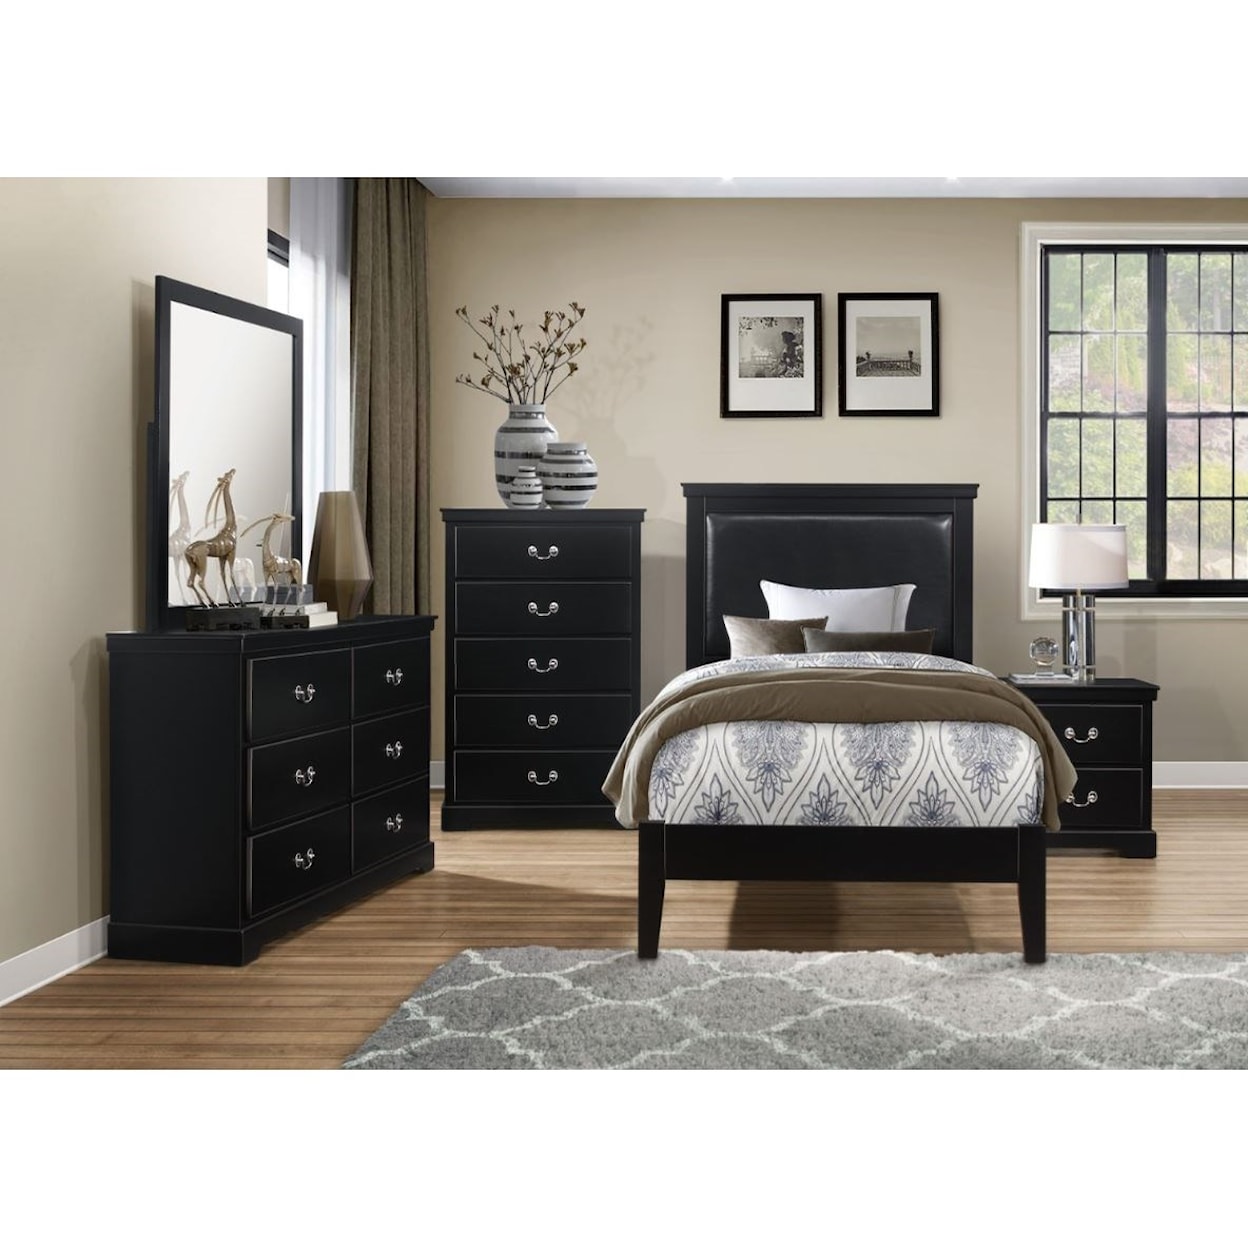 Homelegance Seabright Twin Bedroom Group